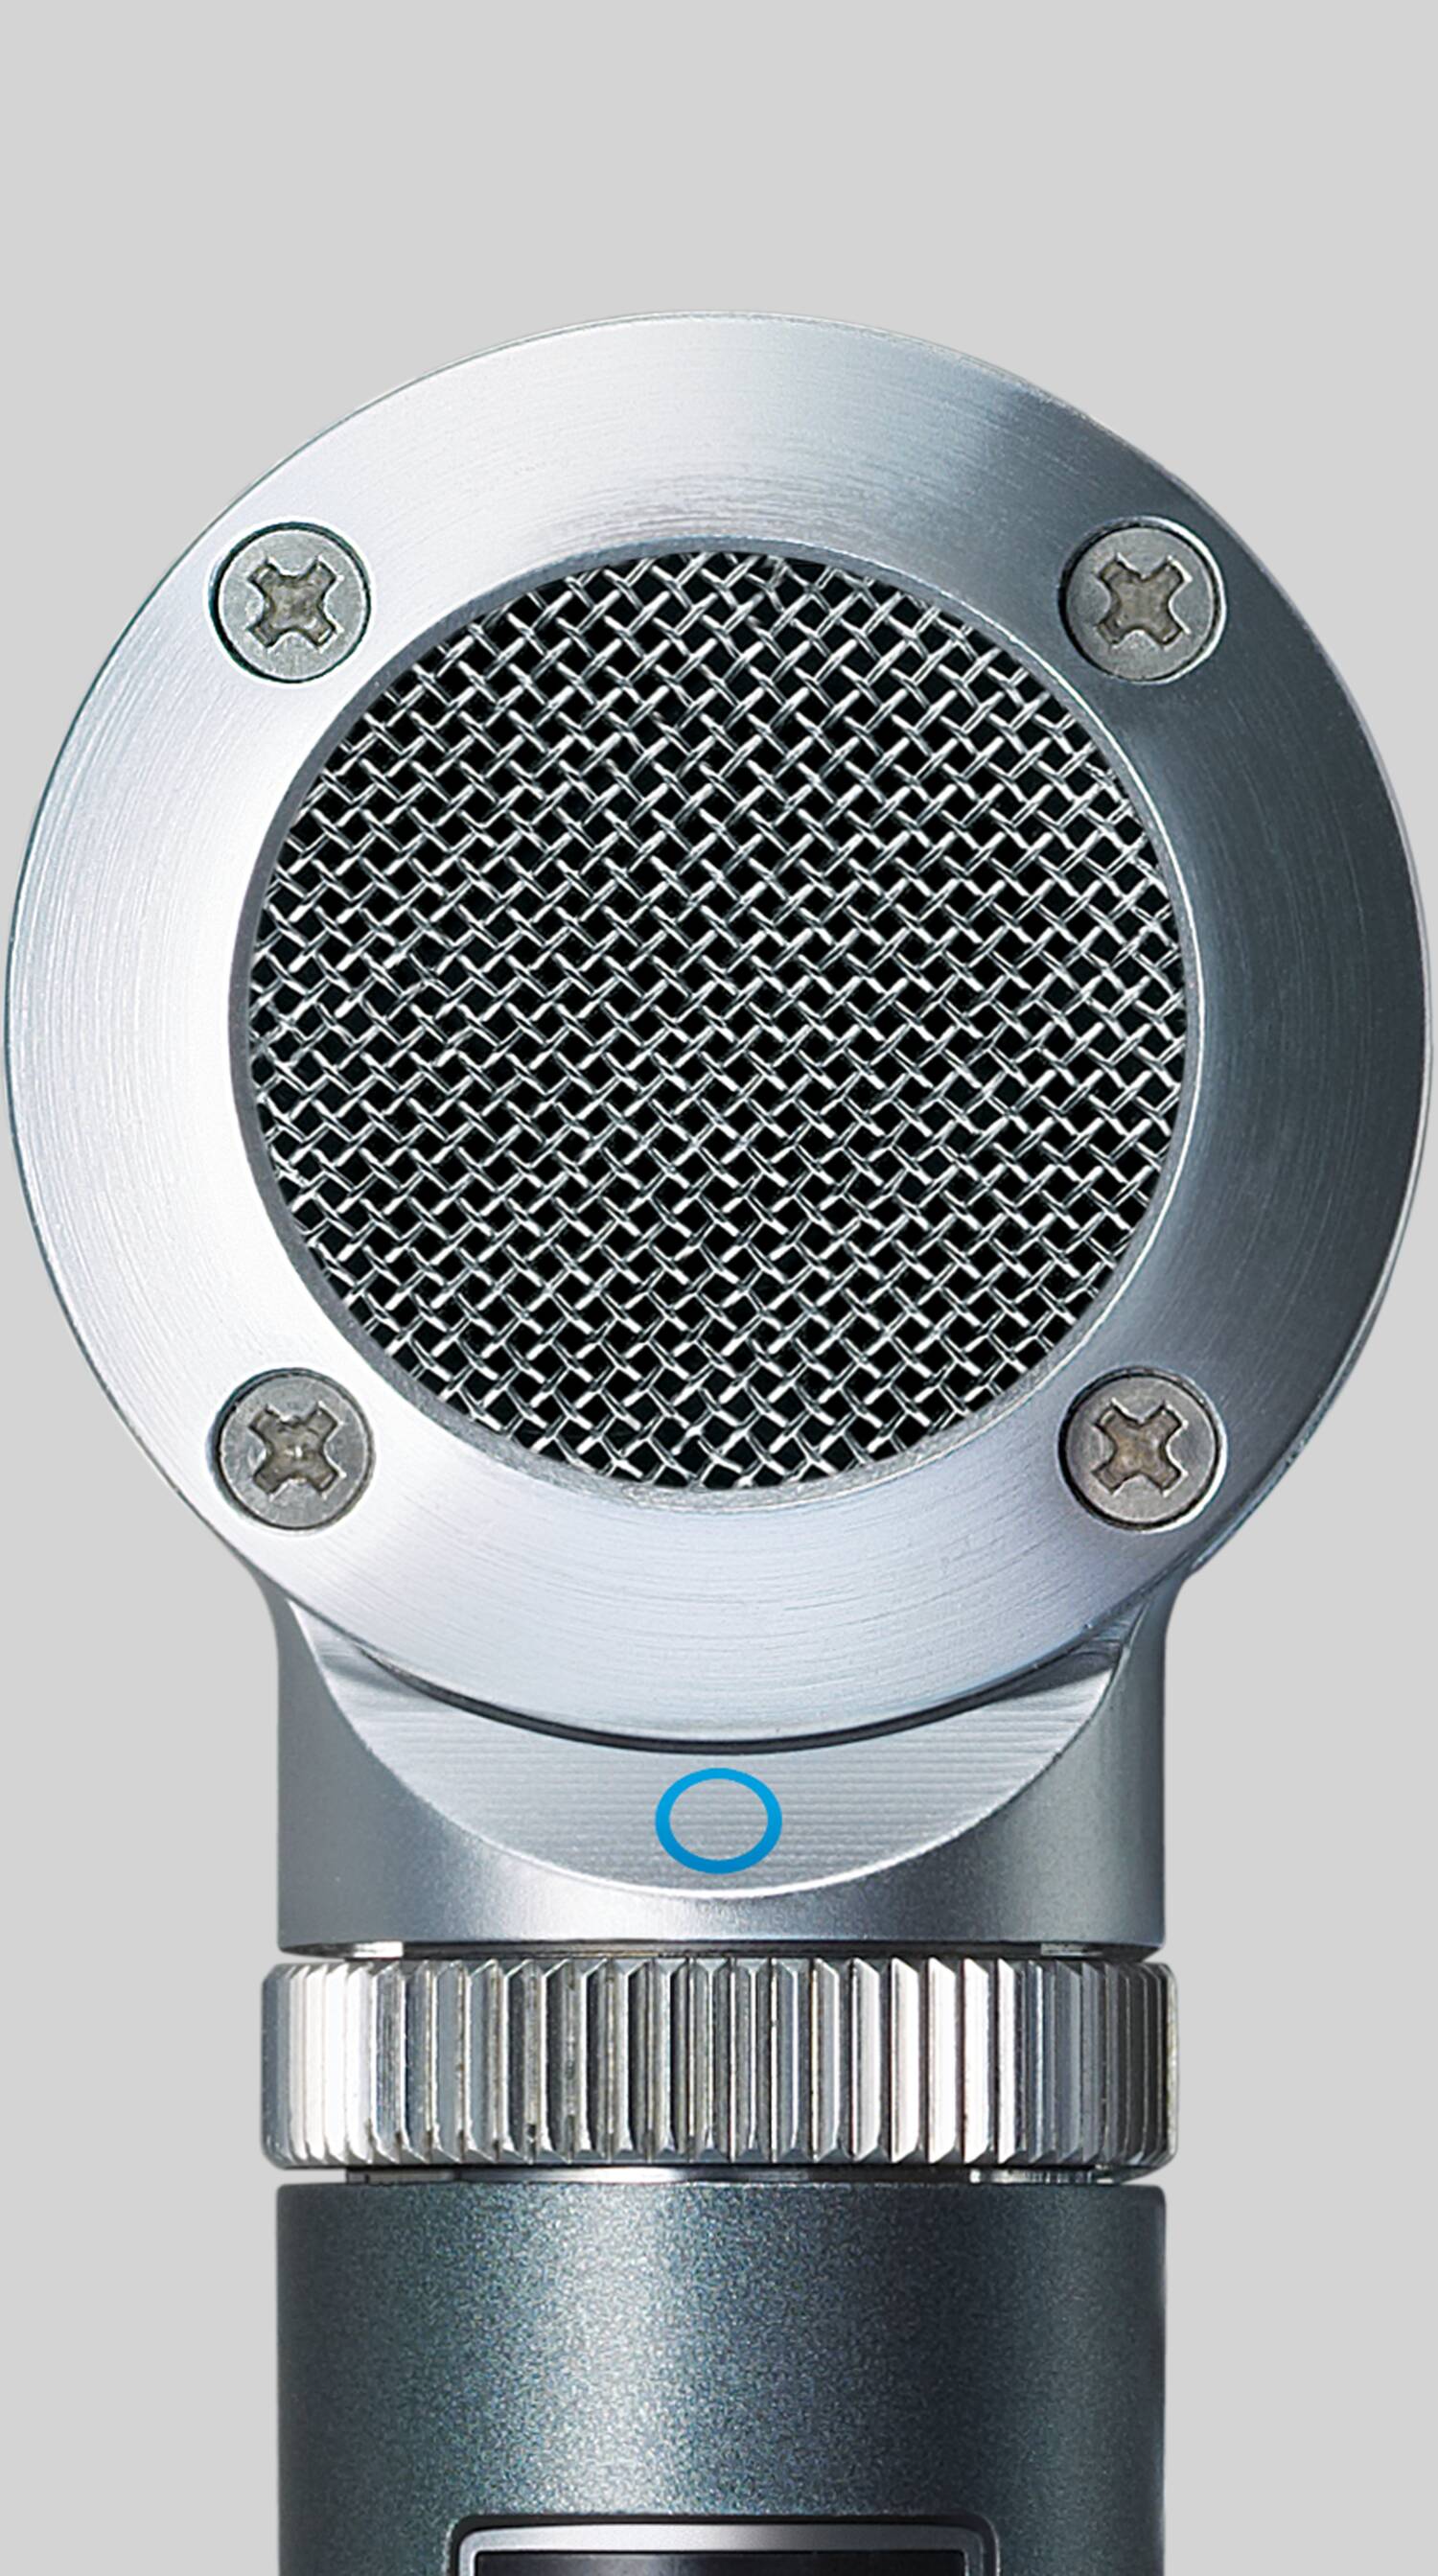 BETA 181 - Side-Address Condenser Microphone with interchangeable 